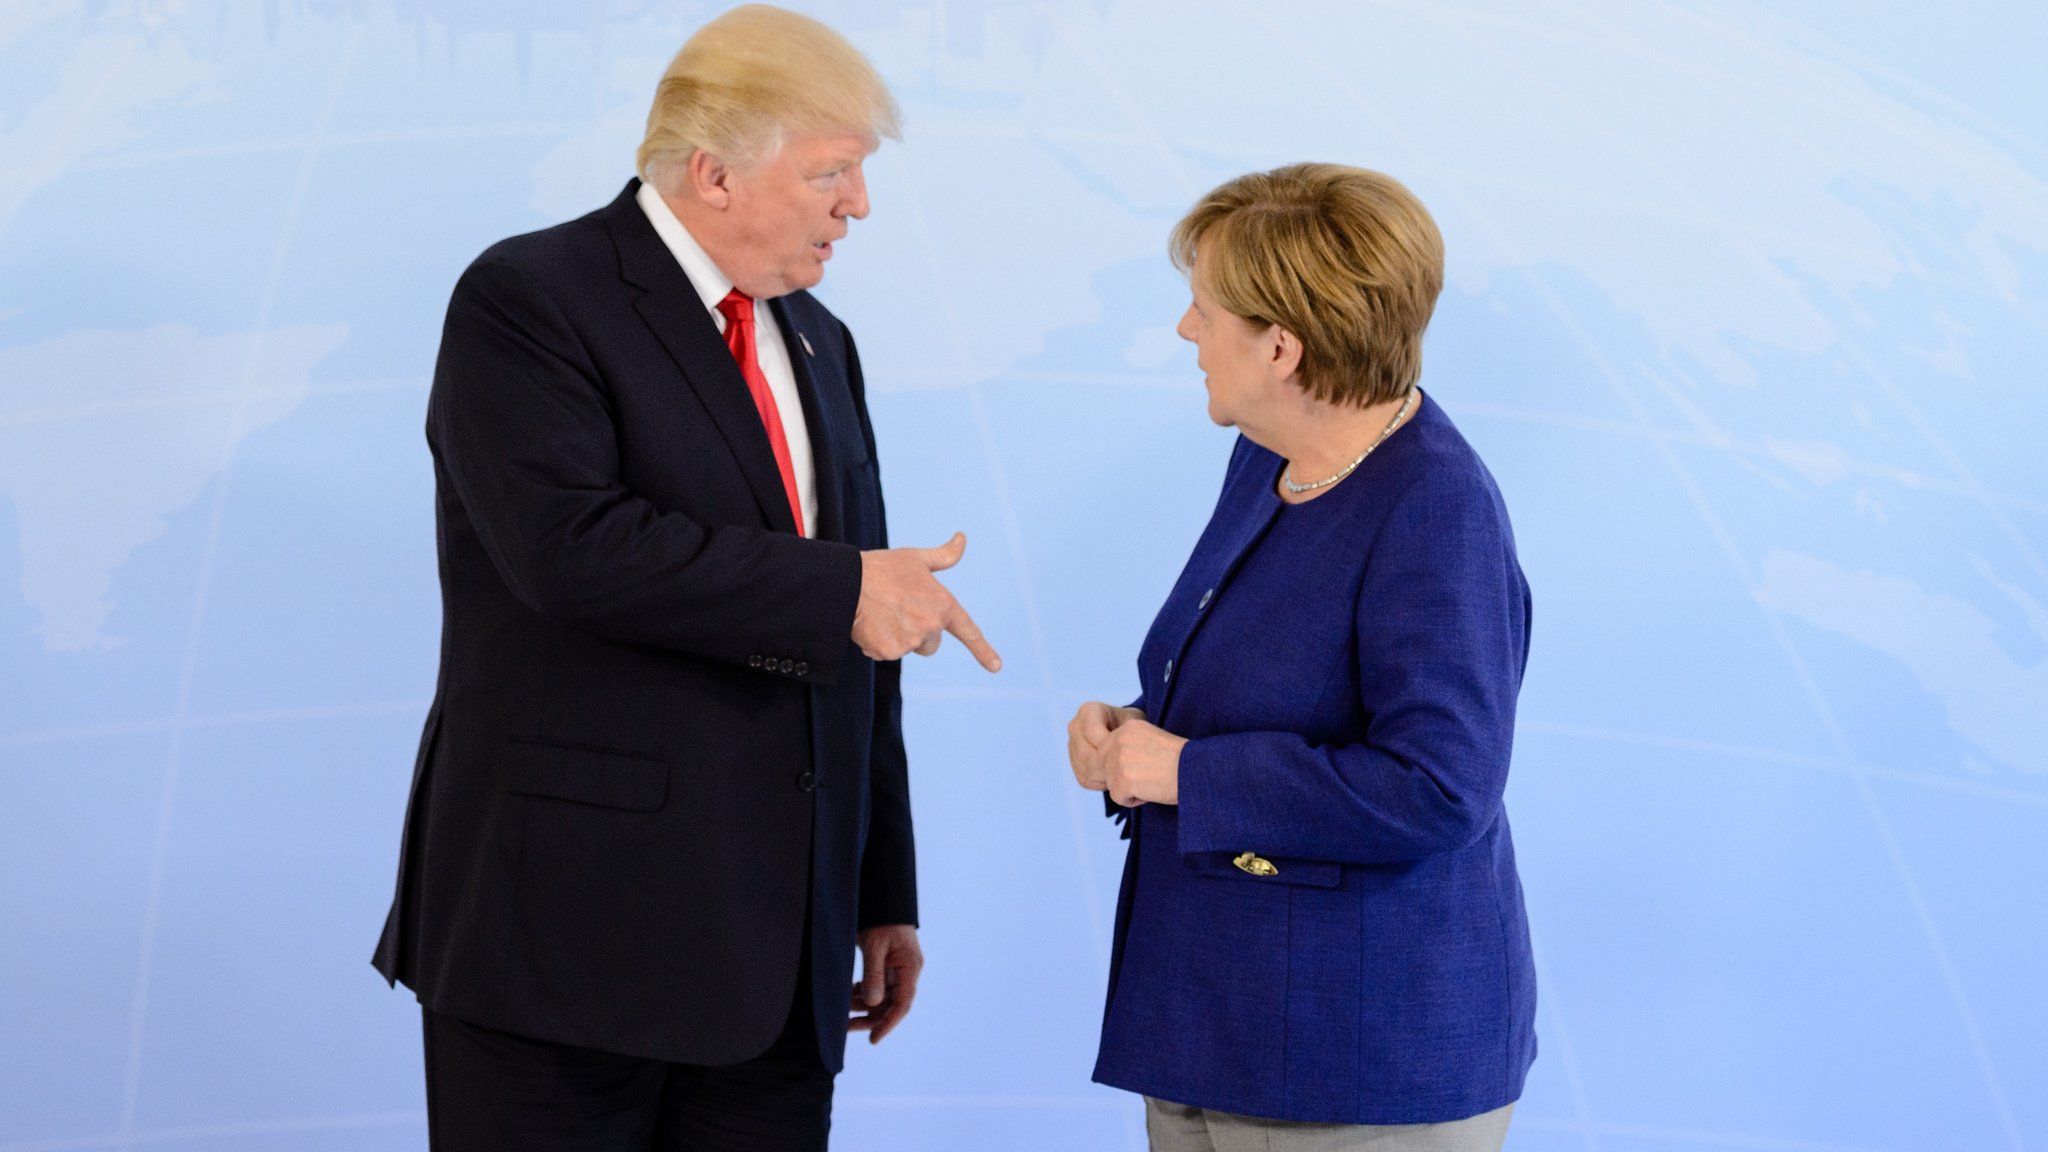 German Chancellor Angela Merkel receives U.S. President Donald Trump in the Hotel Atlantic, on the eve of the G20 summit, for bilateral talks on July 6, 2017 in Hamburg, Germany.